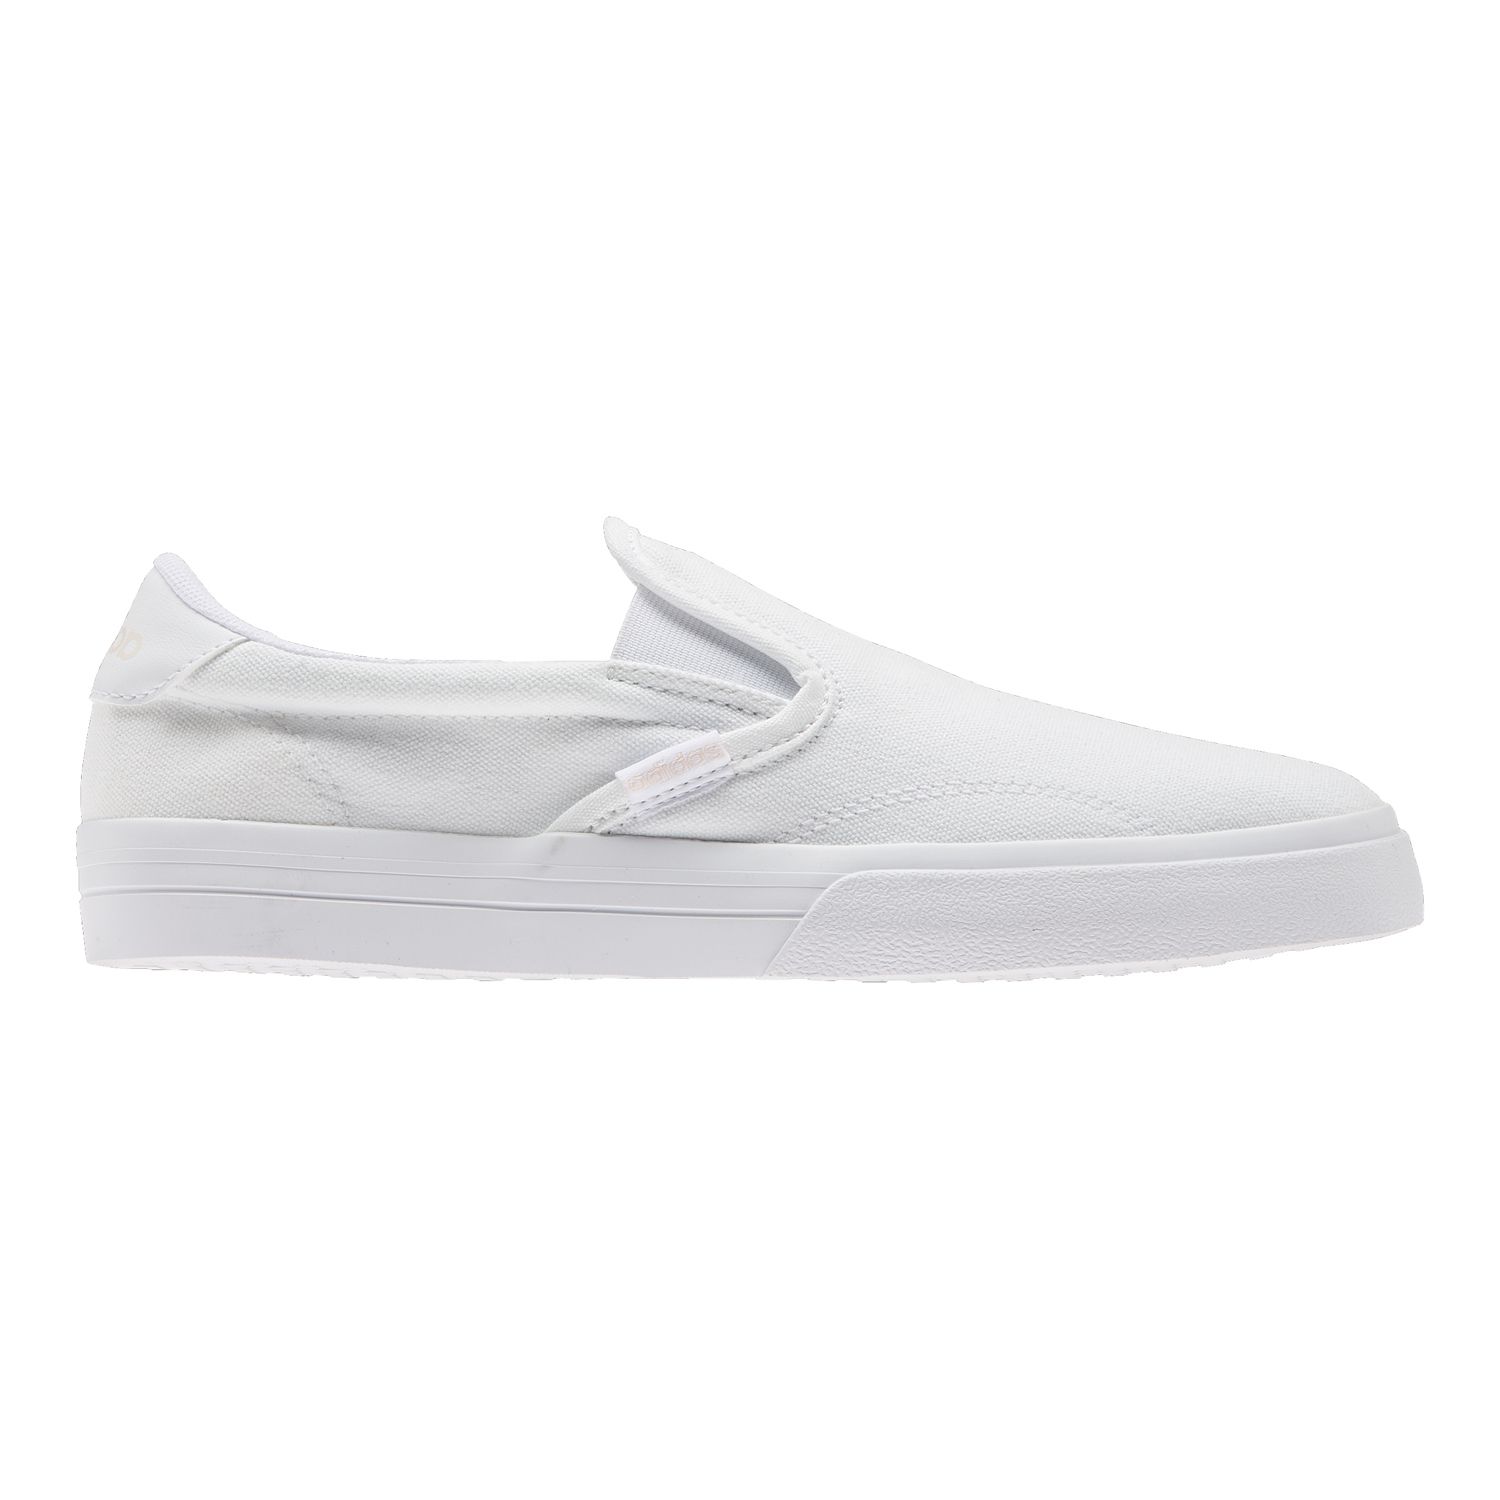 adidas shoes for women slip on